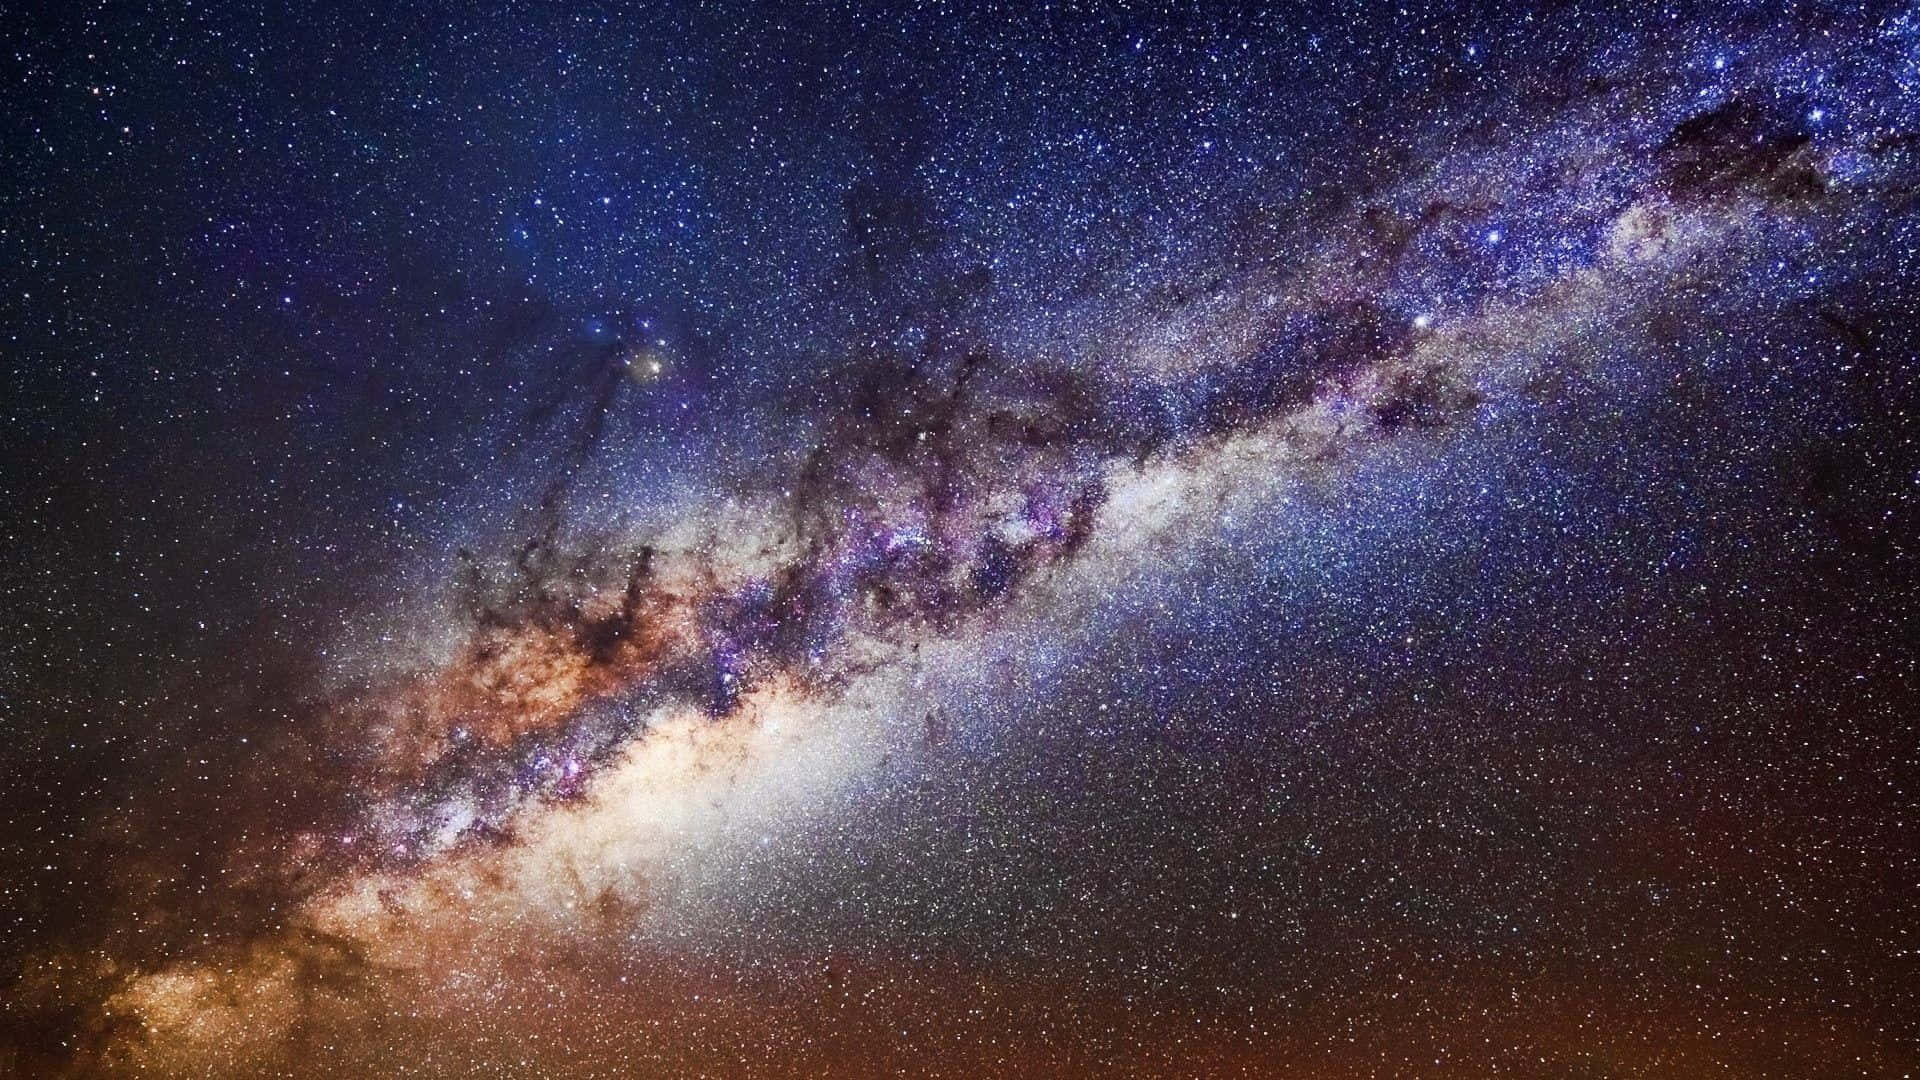 The beauty of the real galaxy beyond our universe